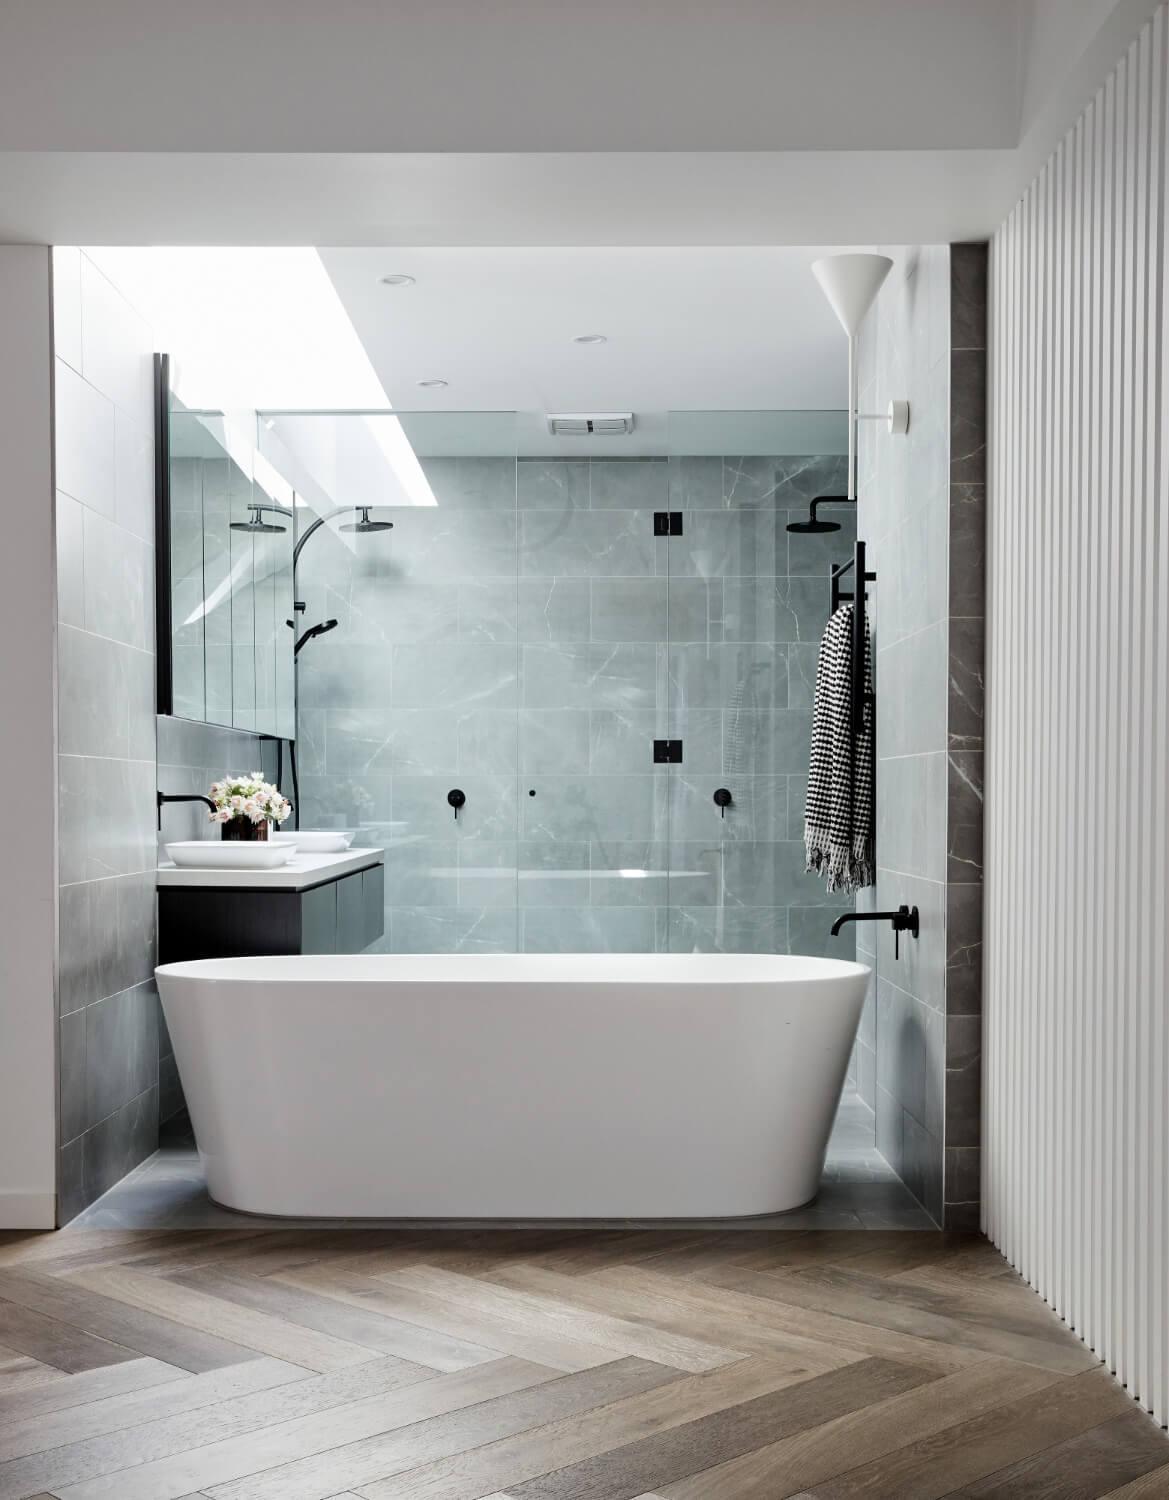 Exposed Ensuite With Floor To Ceiling Porcelain Tiles And Skylight